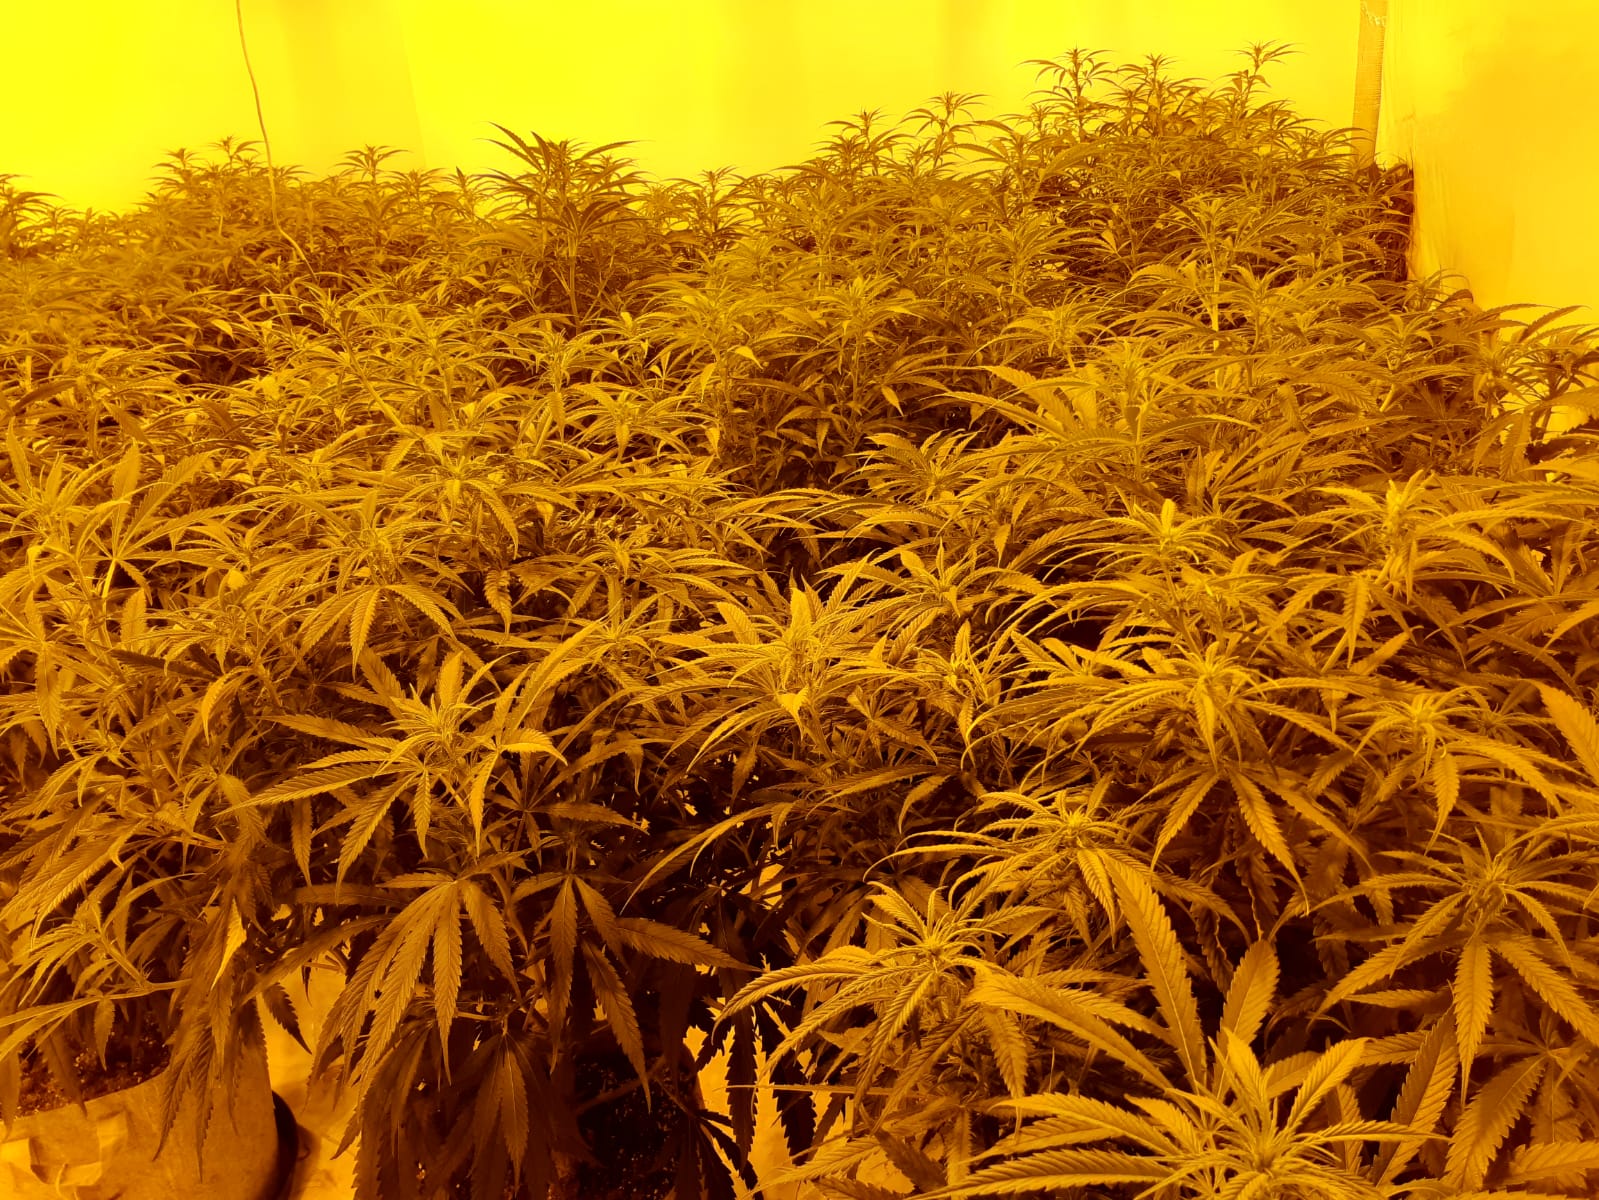 NEWS | Man arrested after 150 cannabis plants seized by West Mercia Police